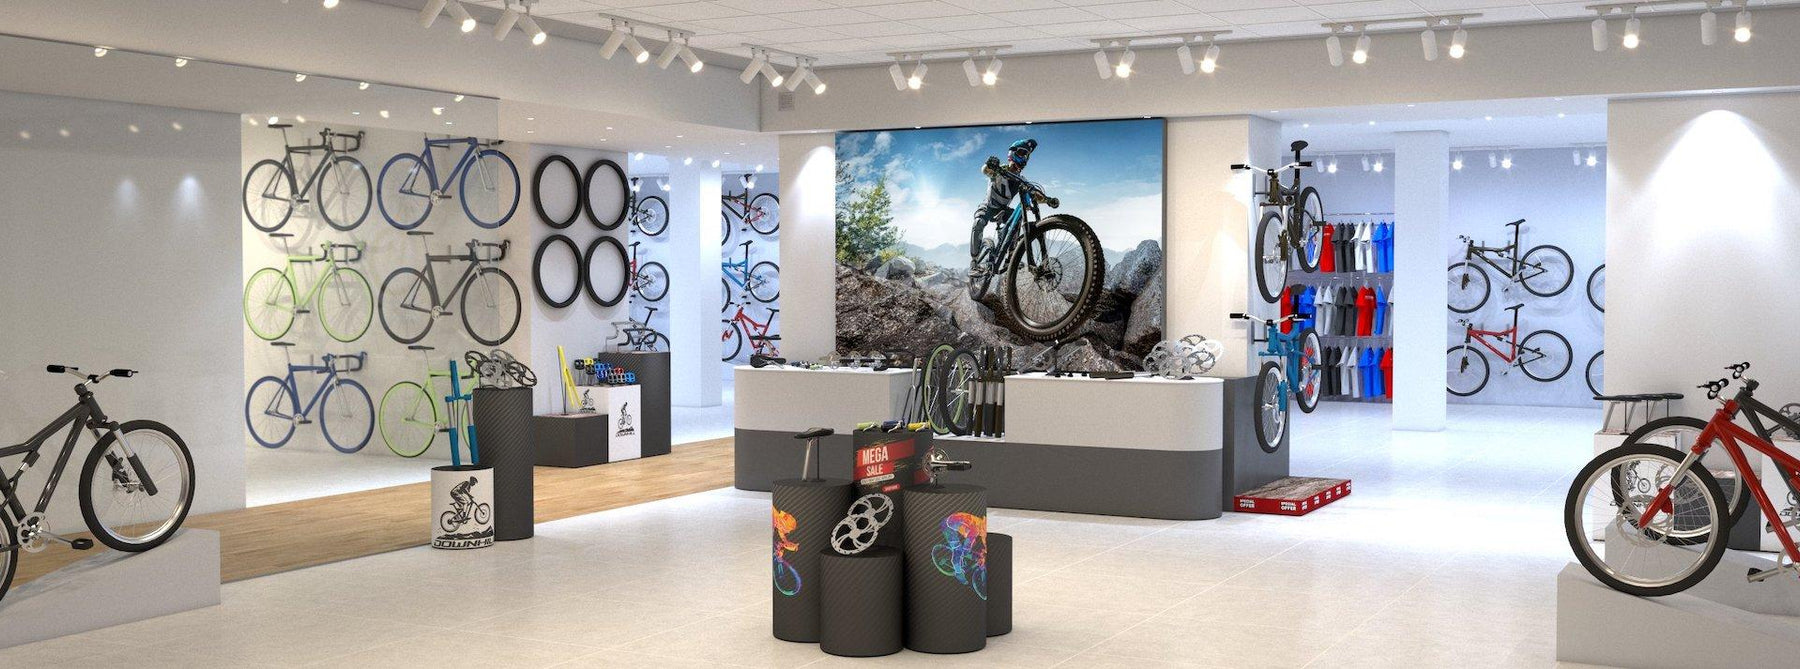 How to be creative with your exhibition stand